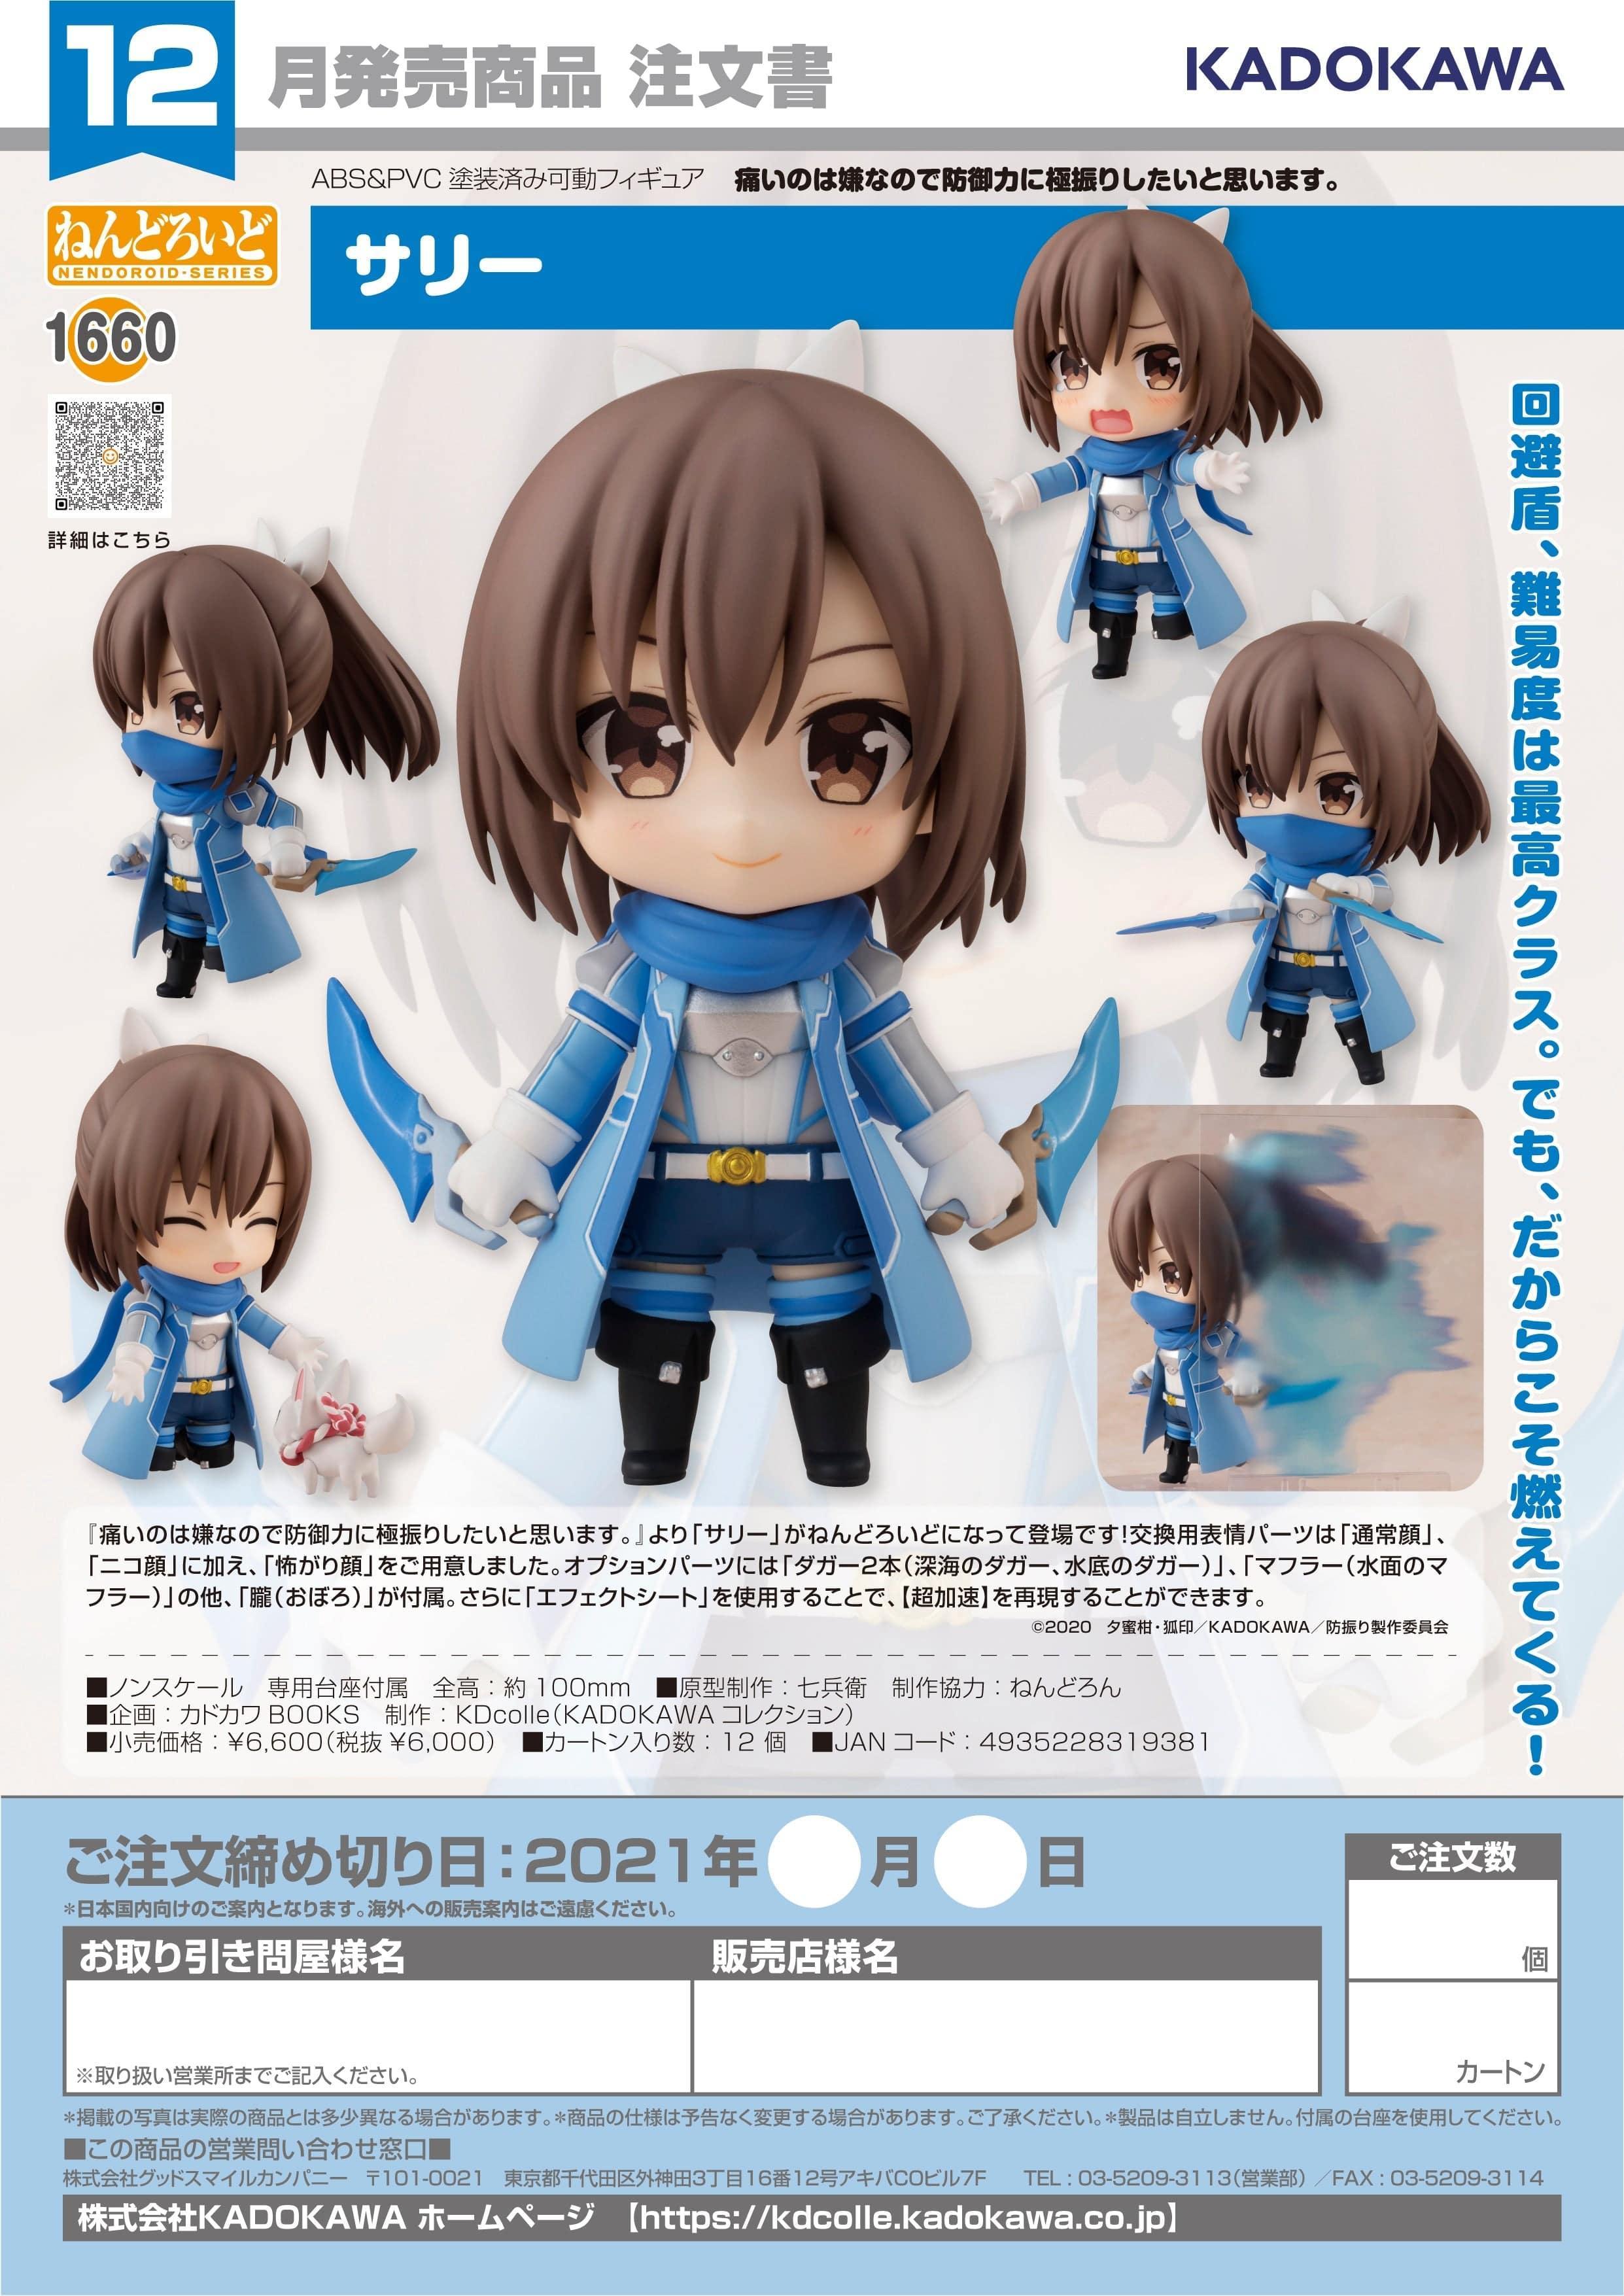 BOFURI: I Don't Want to Get Hurt, so I'll Max Out My Defense - Sally Nendoroid Figure 1660 - The Card Vault